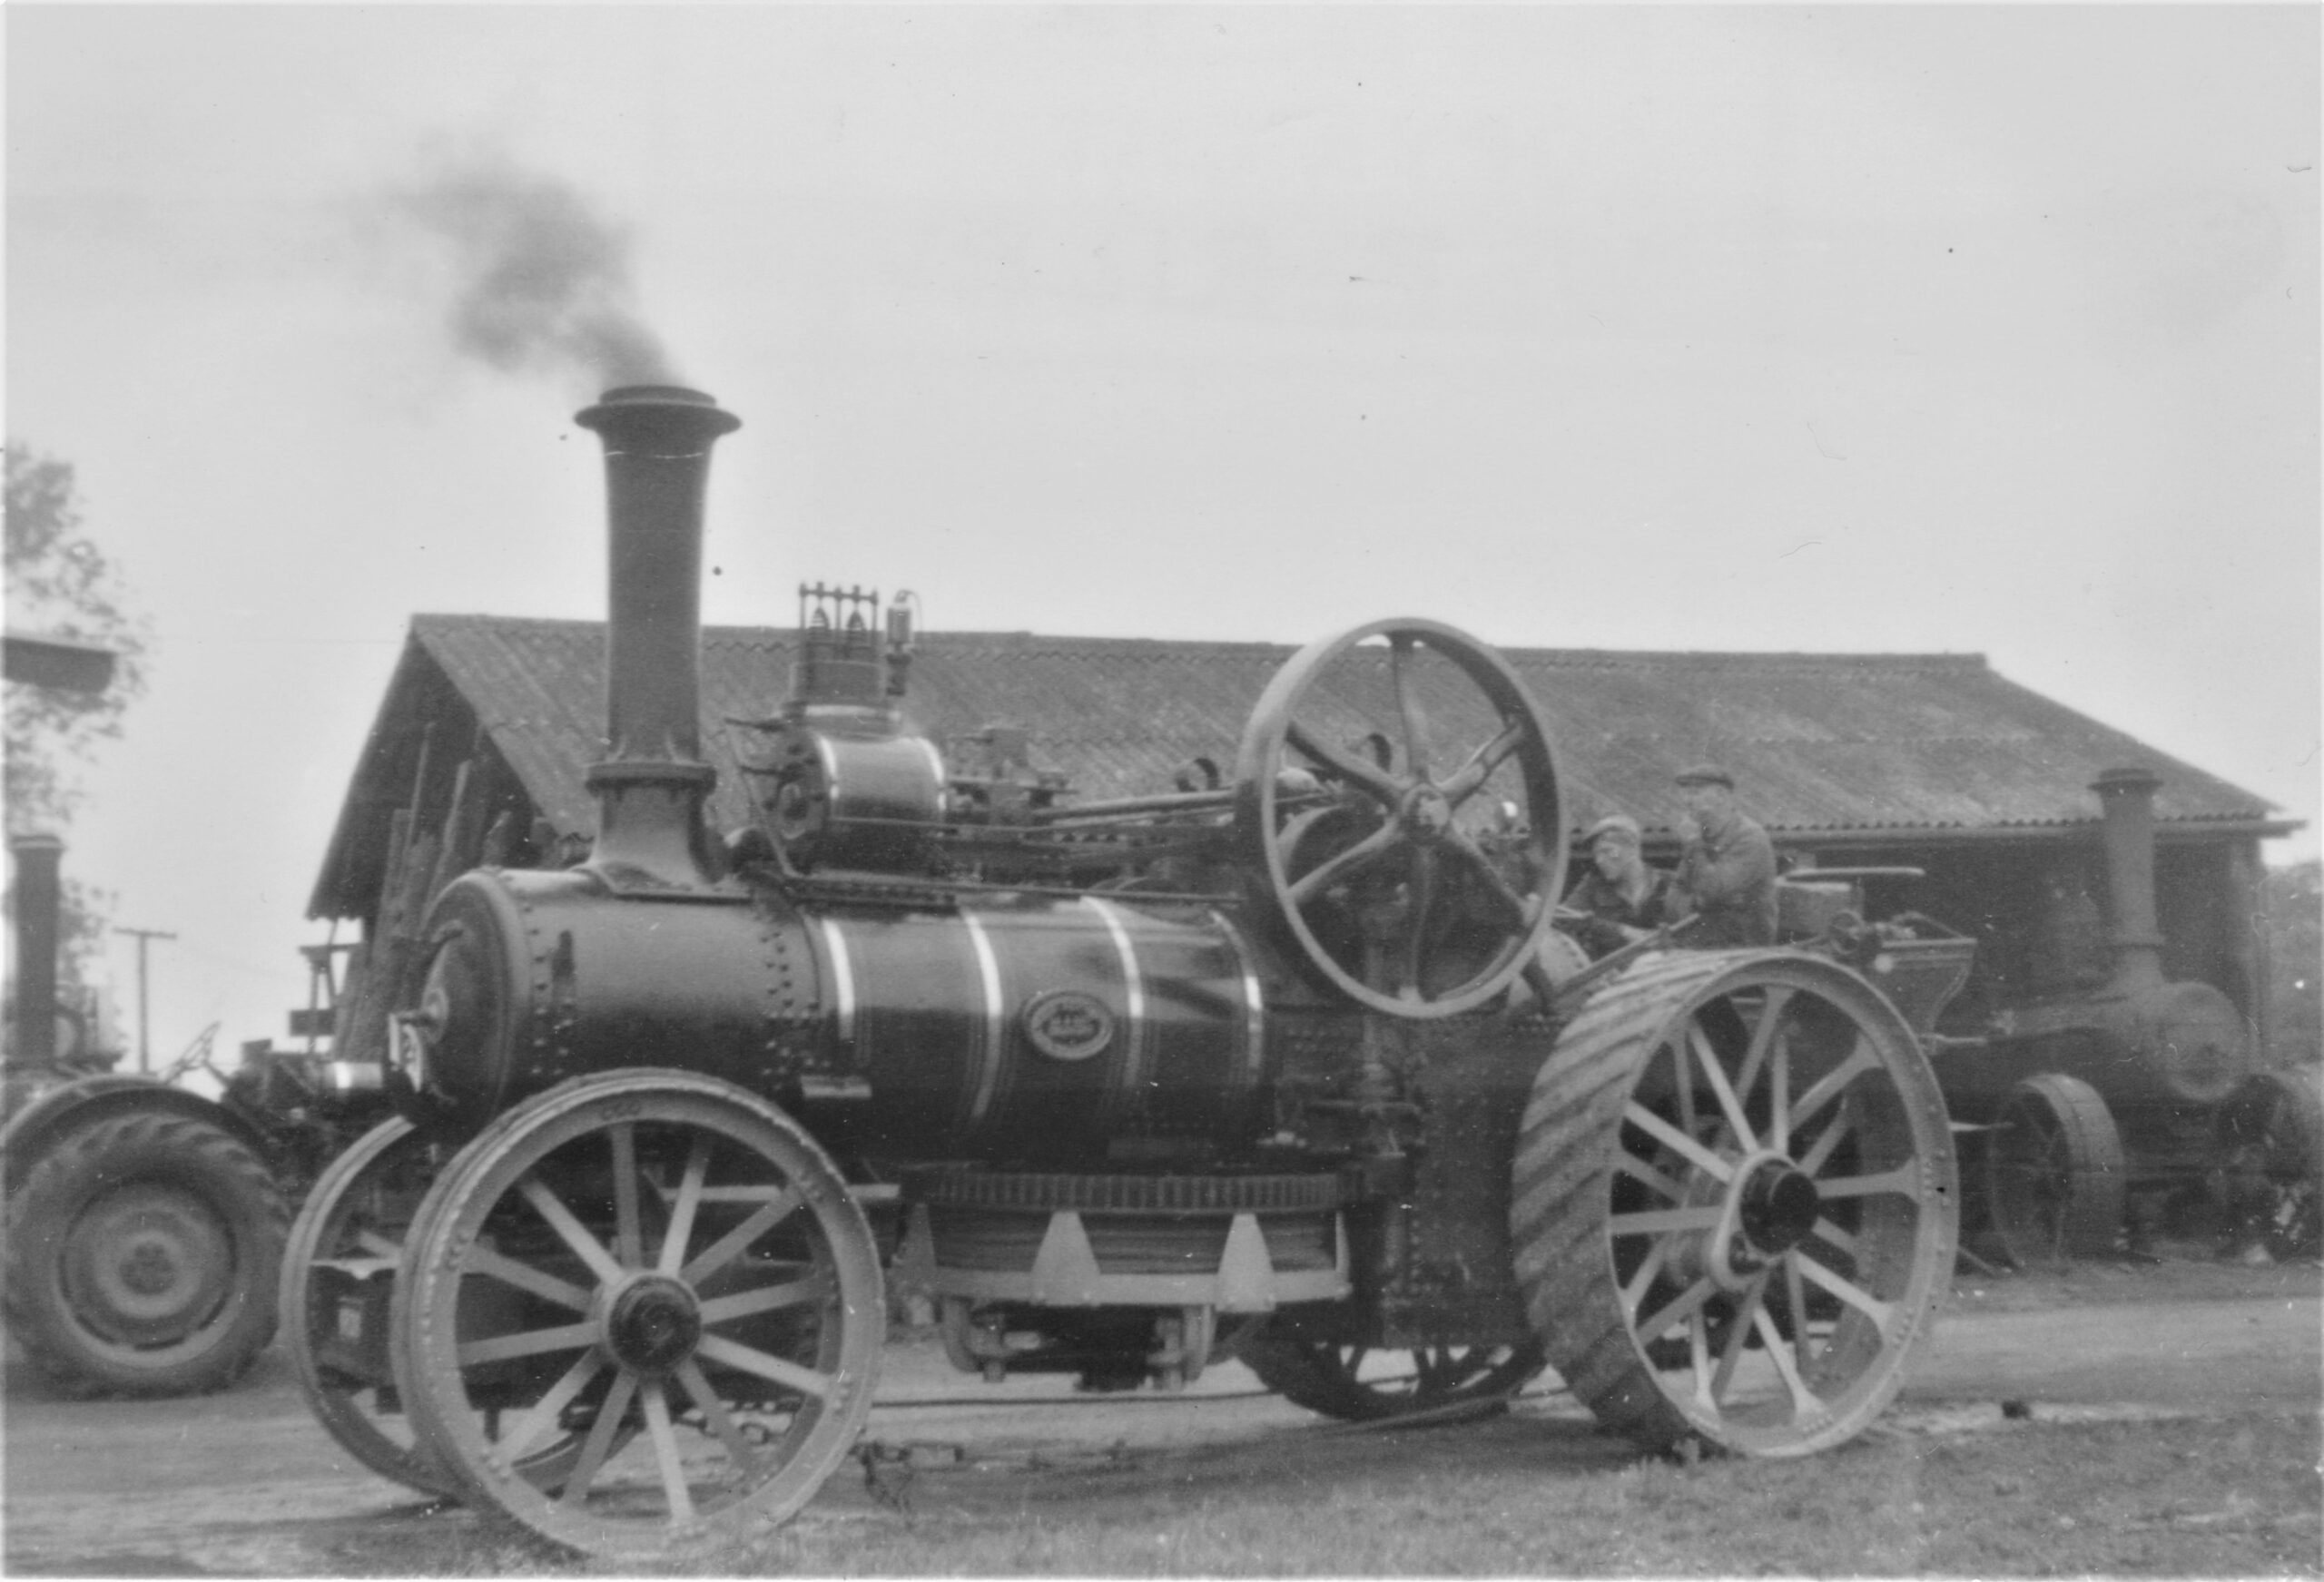 Possibly Fowler 14hp single number 1641 of 1871? B.D. Stoyel photo.